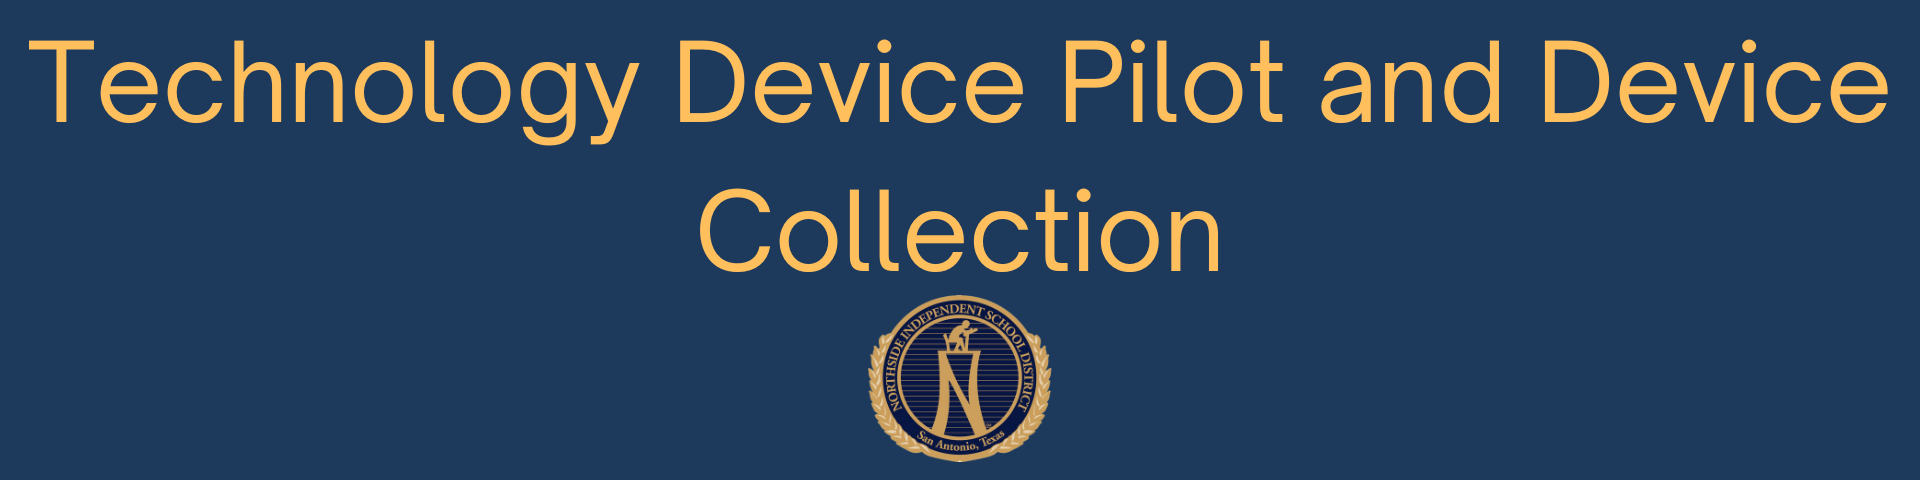 Technology device pilot and collection